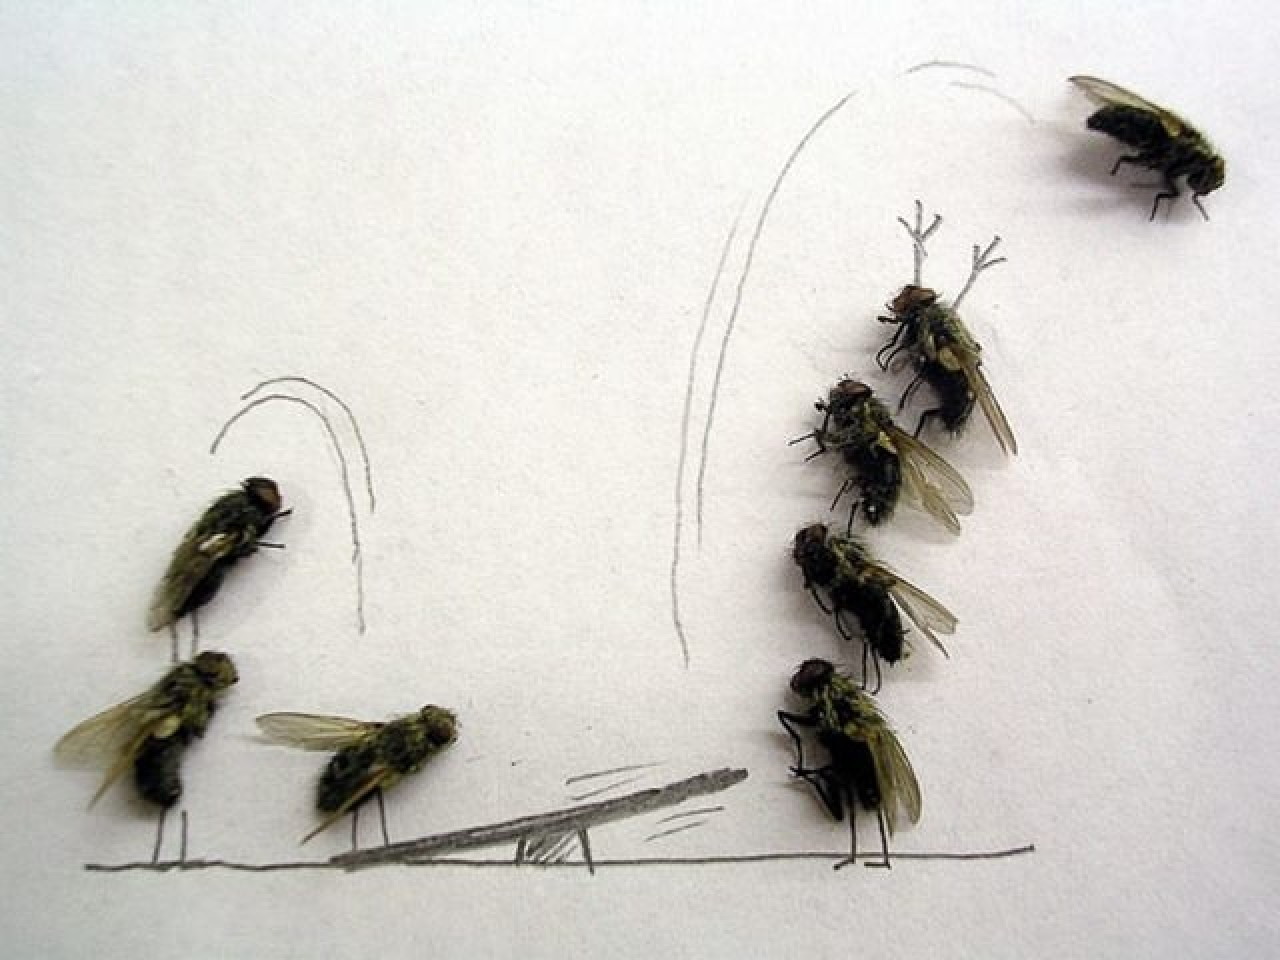 Flies Playing With Seesaw Funny Image